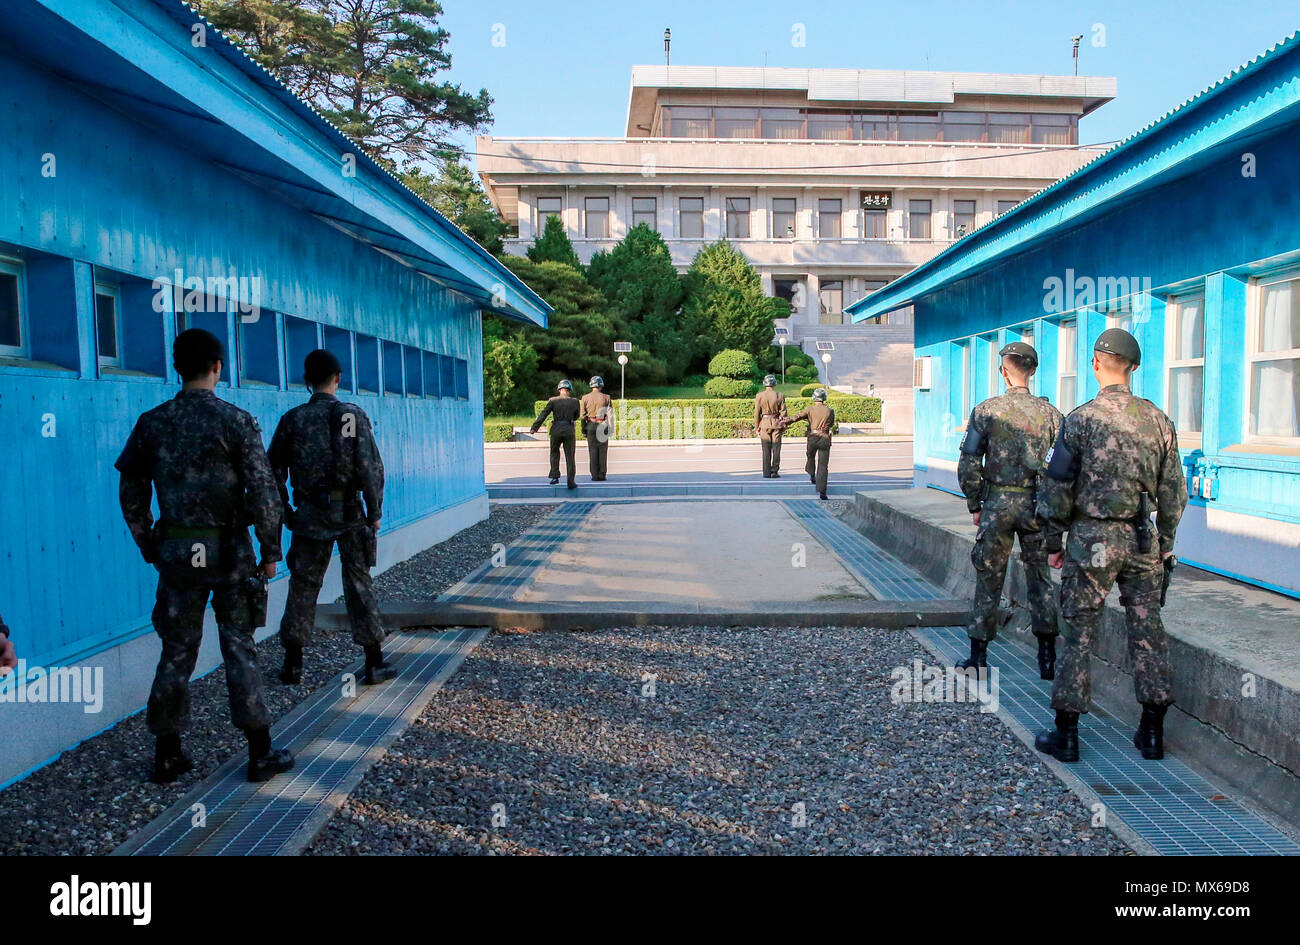 Panmunjom, June 1, 2018 : South Korean soldiers (front) and North Korean soldiers stand guard after inter-Korean high-level talks at the border truce village of Panmunjom, north of Seoul, South Korea. The high-level talks was held on Friday to discuss steps to implement agreements reached during the April 27 inter-Korean summit. South and North Koreas agreed on June 1 to hold general-level military talks on June 14 at the Panmunjom as part of efforts to ease tensions between the two Koreas and agreed to hold a Red Cross meeting on June 22 at North Korea's Mount Kumgang resort to discuss holdin Stock Photo